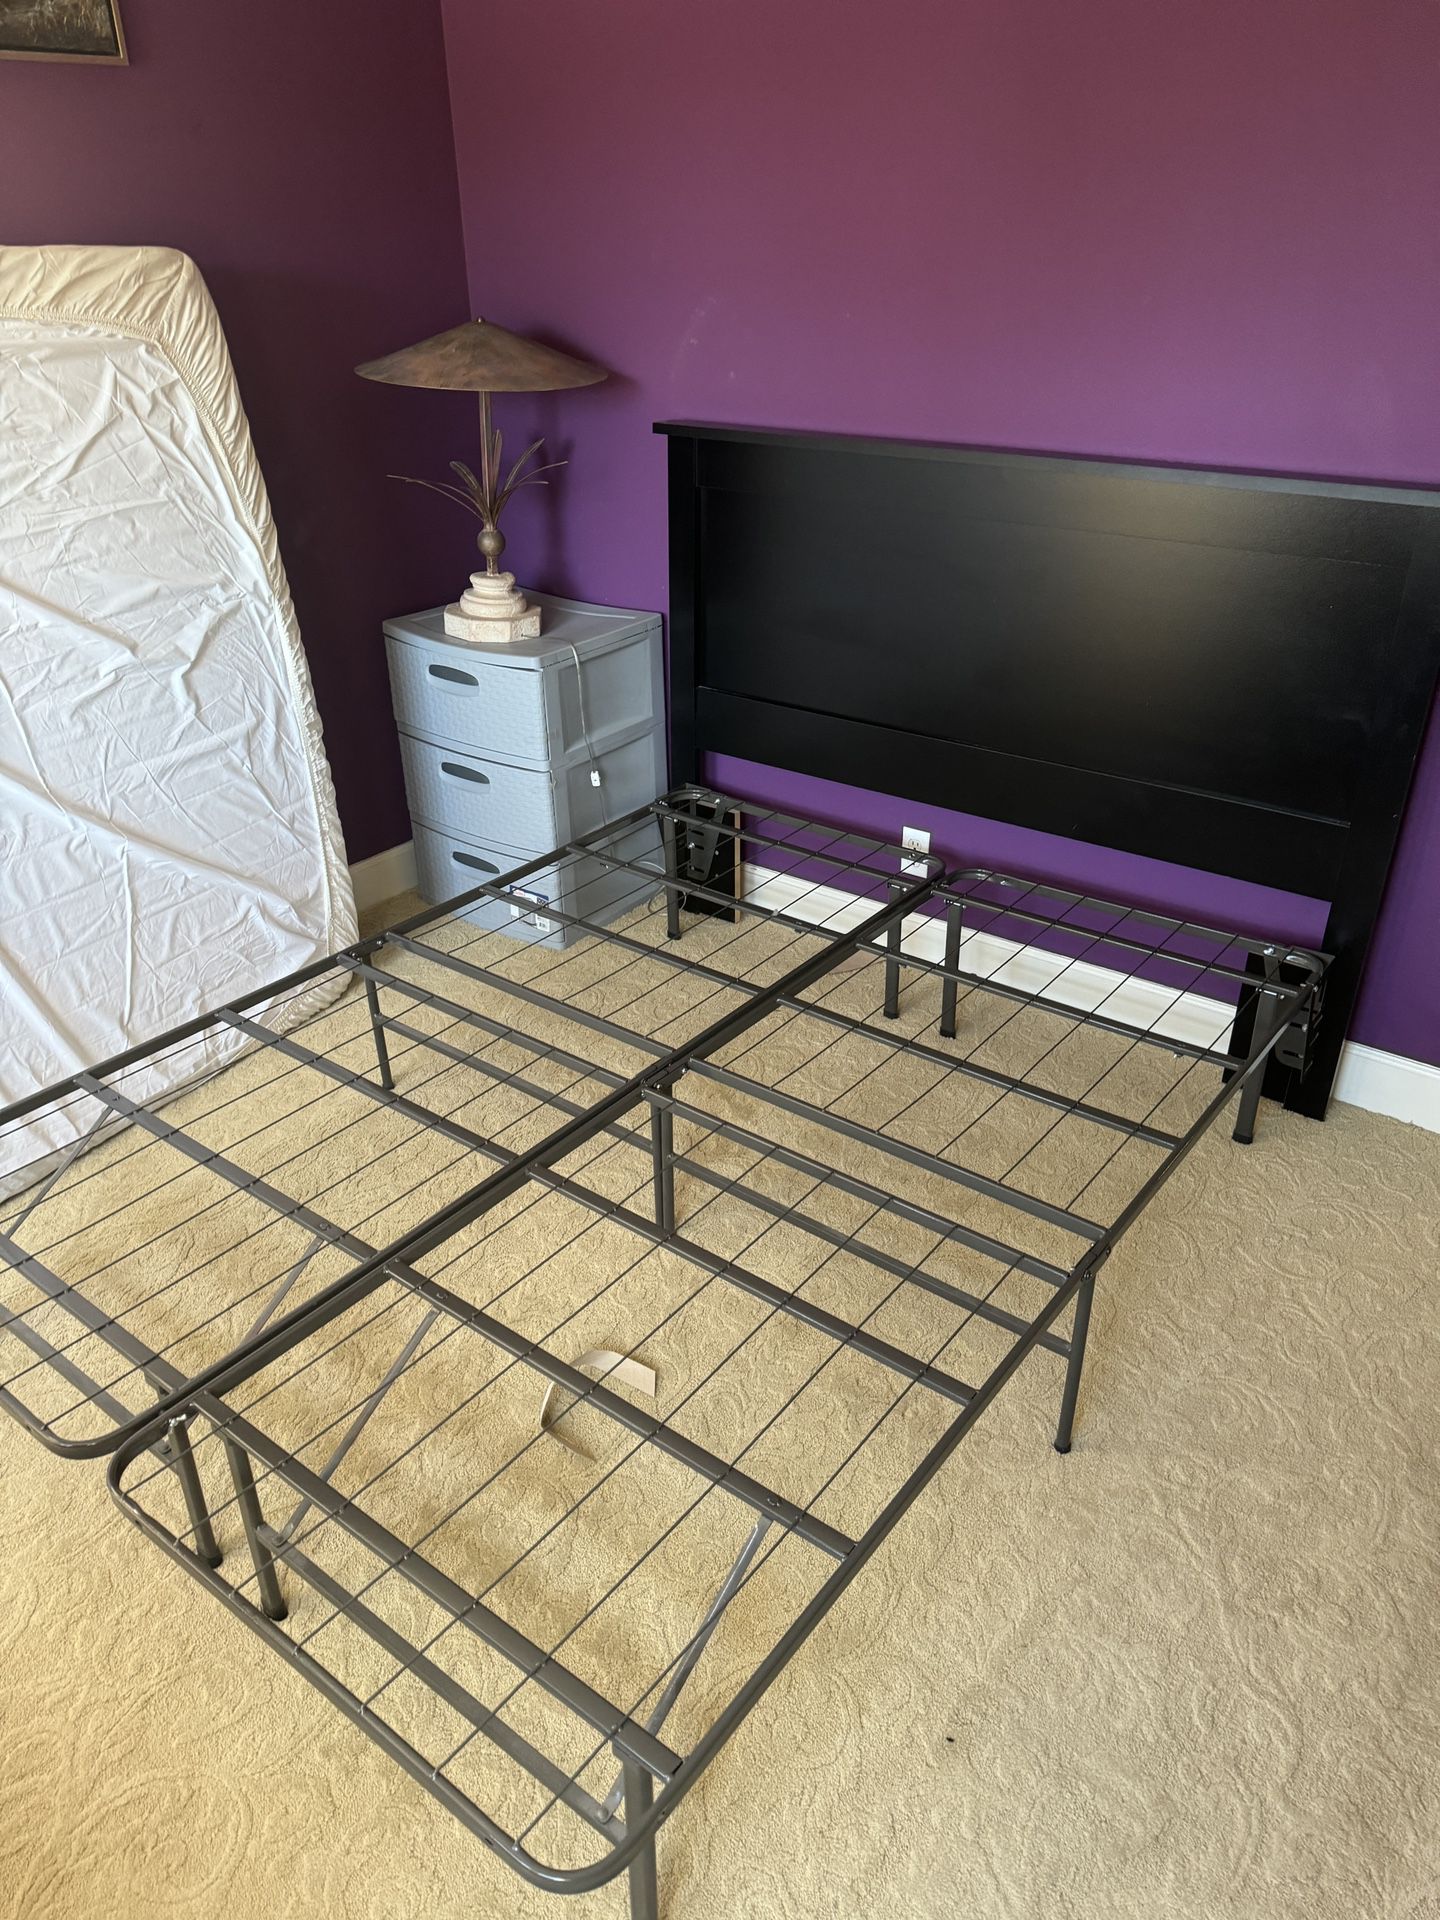 Queen Sized Bed Frame For Sale